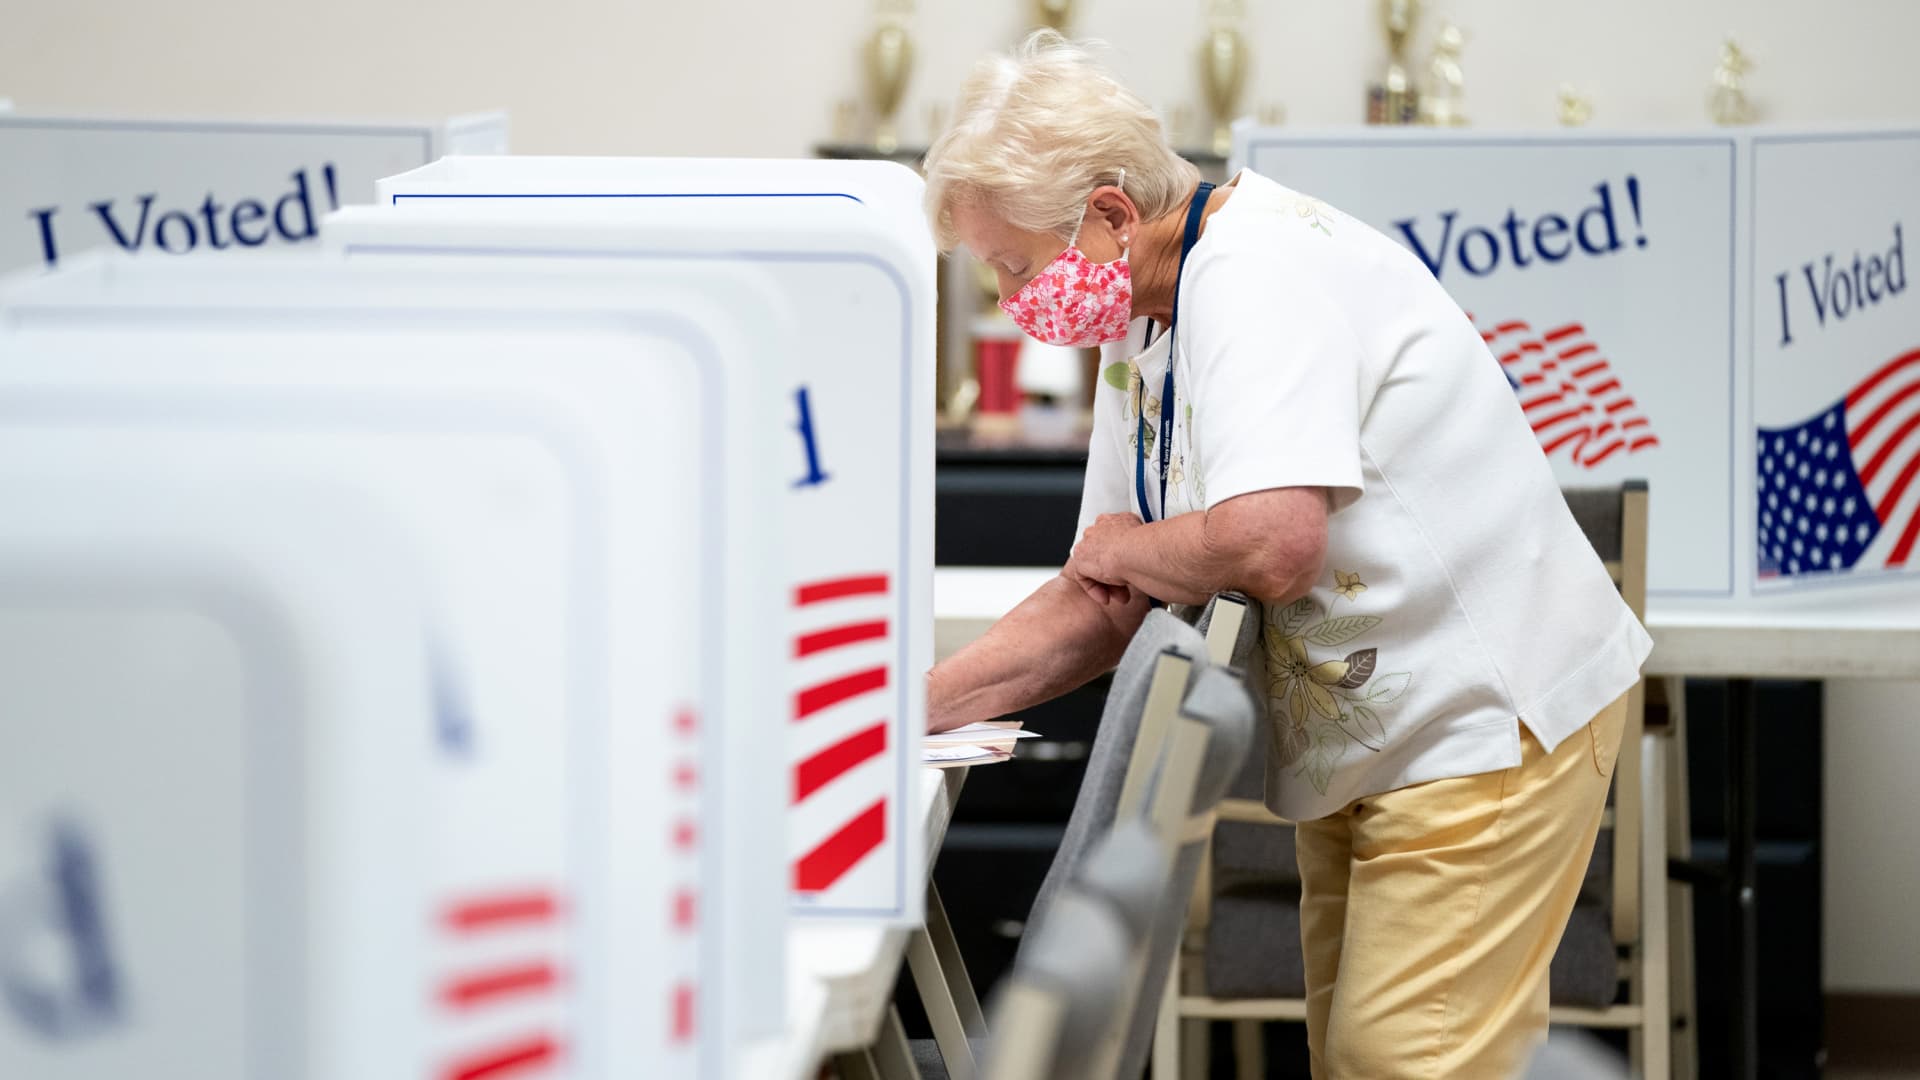 A woman votes at a polling booth on May 17, 2022 in Norwood, North Carolina, United States. North Carolina is one of several states holding midterm primary elections.